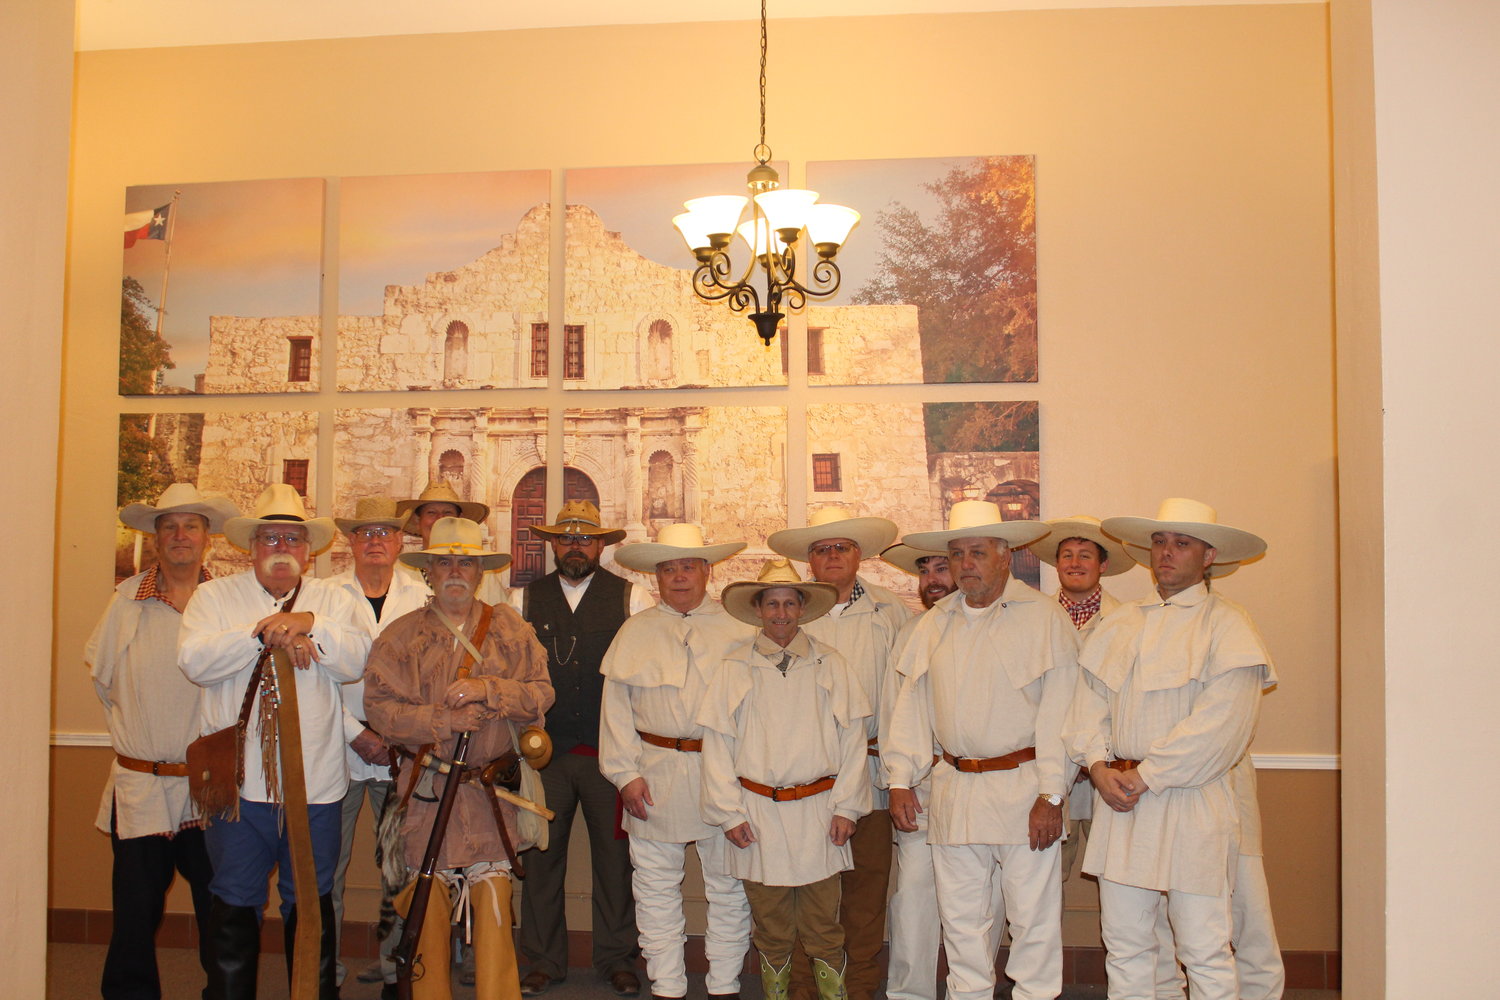 Over 32 men, women and children from Gonzales and around Texas participated in the 183rd anniversary of the arrival of the Immortal 32 at the famous mission on Friday, March 1. Picture here is a group of many of the men who marched into the Alamo.